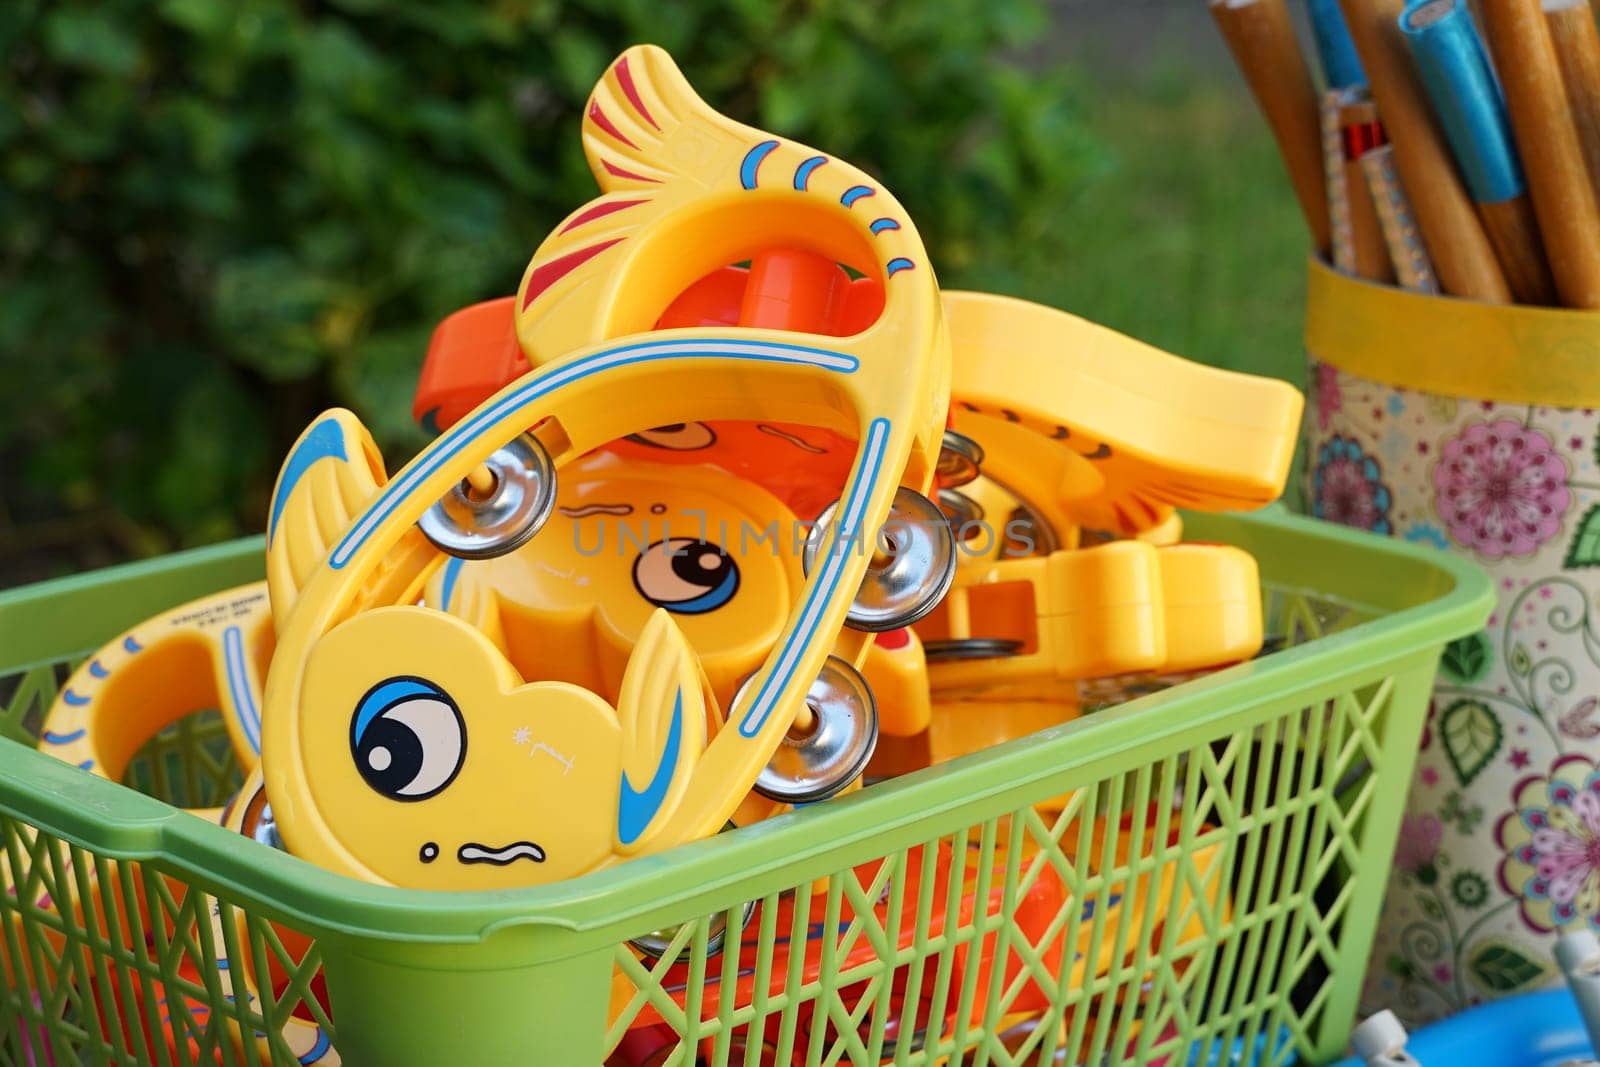 Children's toys in a green plastic basket.